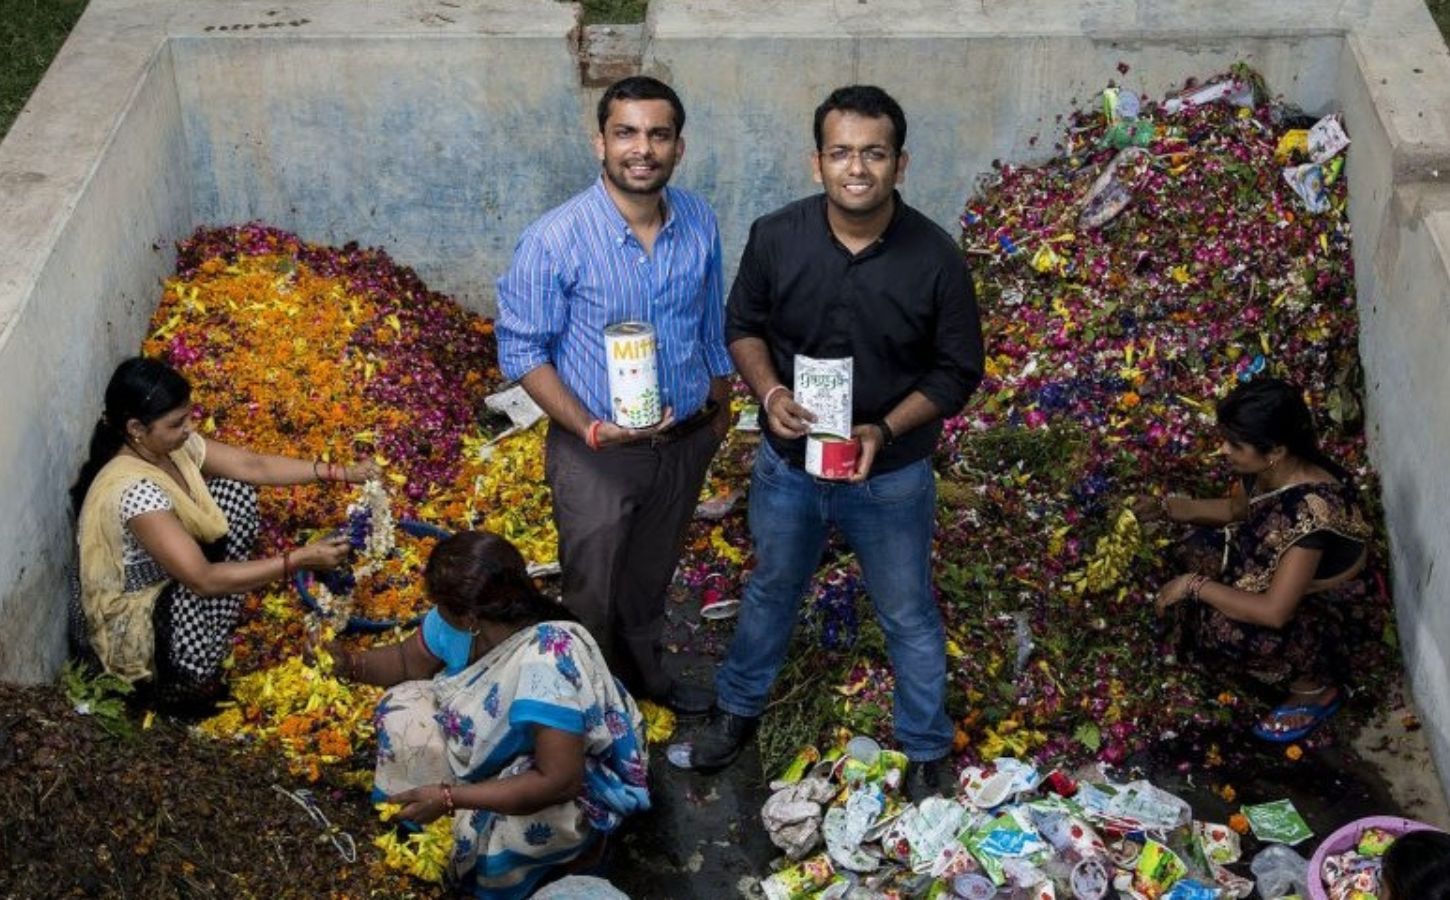 The founders of Fleather flower leather start-up Phool